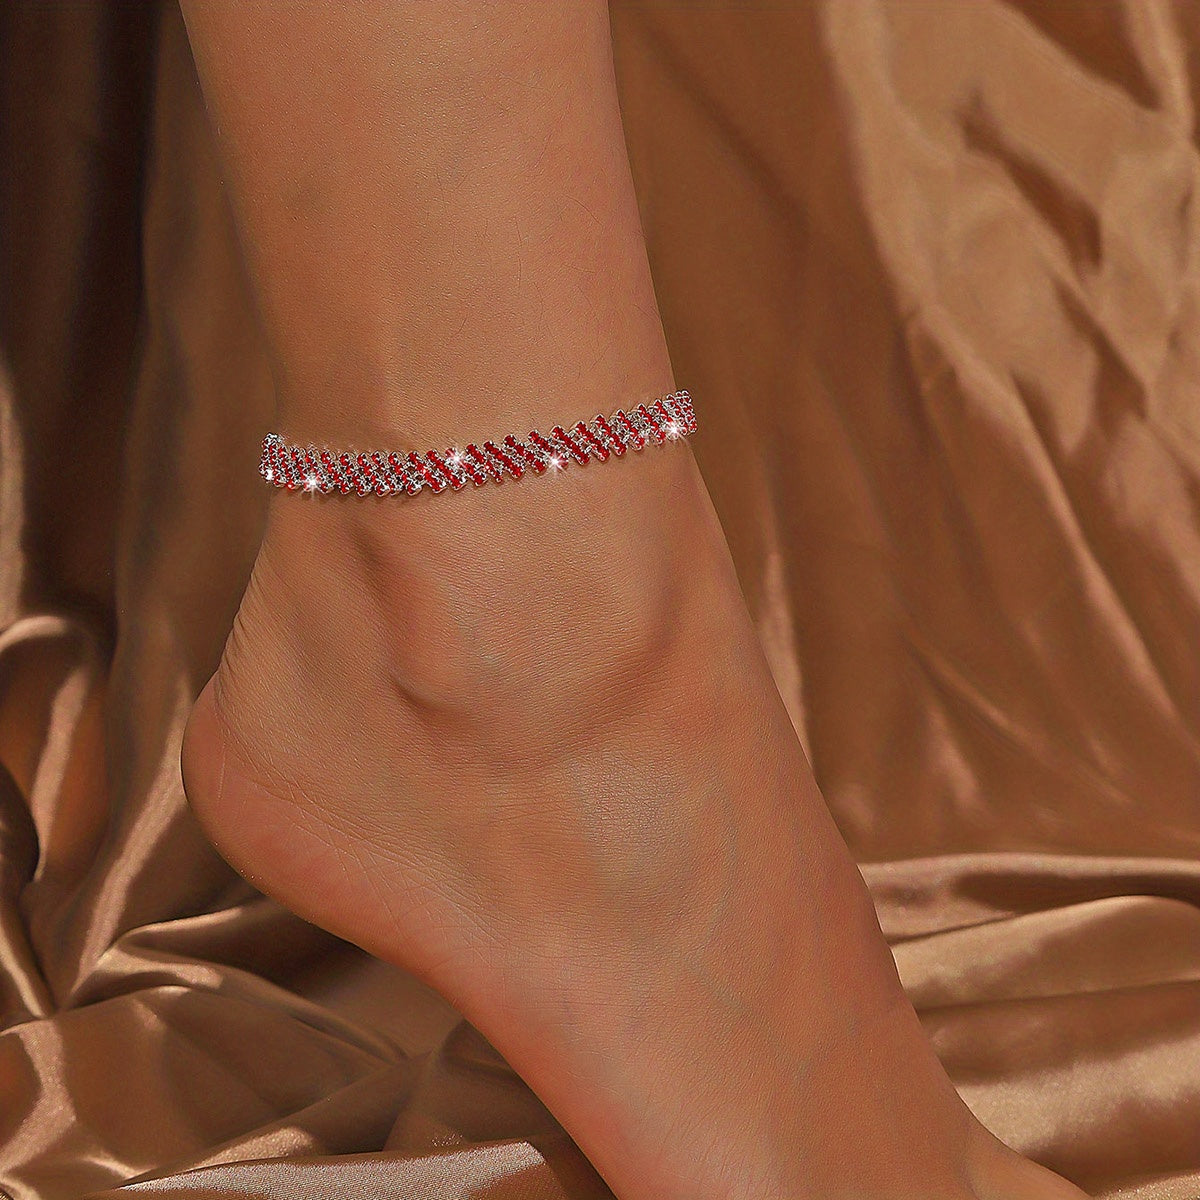 Shine Bright Like a Diamond with Our Rhombus Rhinestone Tennis Chain Anklet - Perfect for Beach, Wedding and Shiny Decoration!